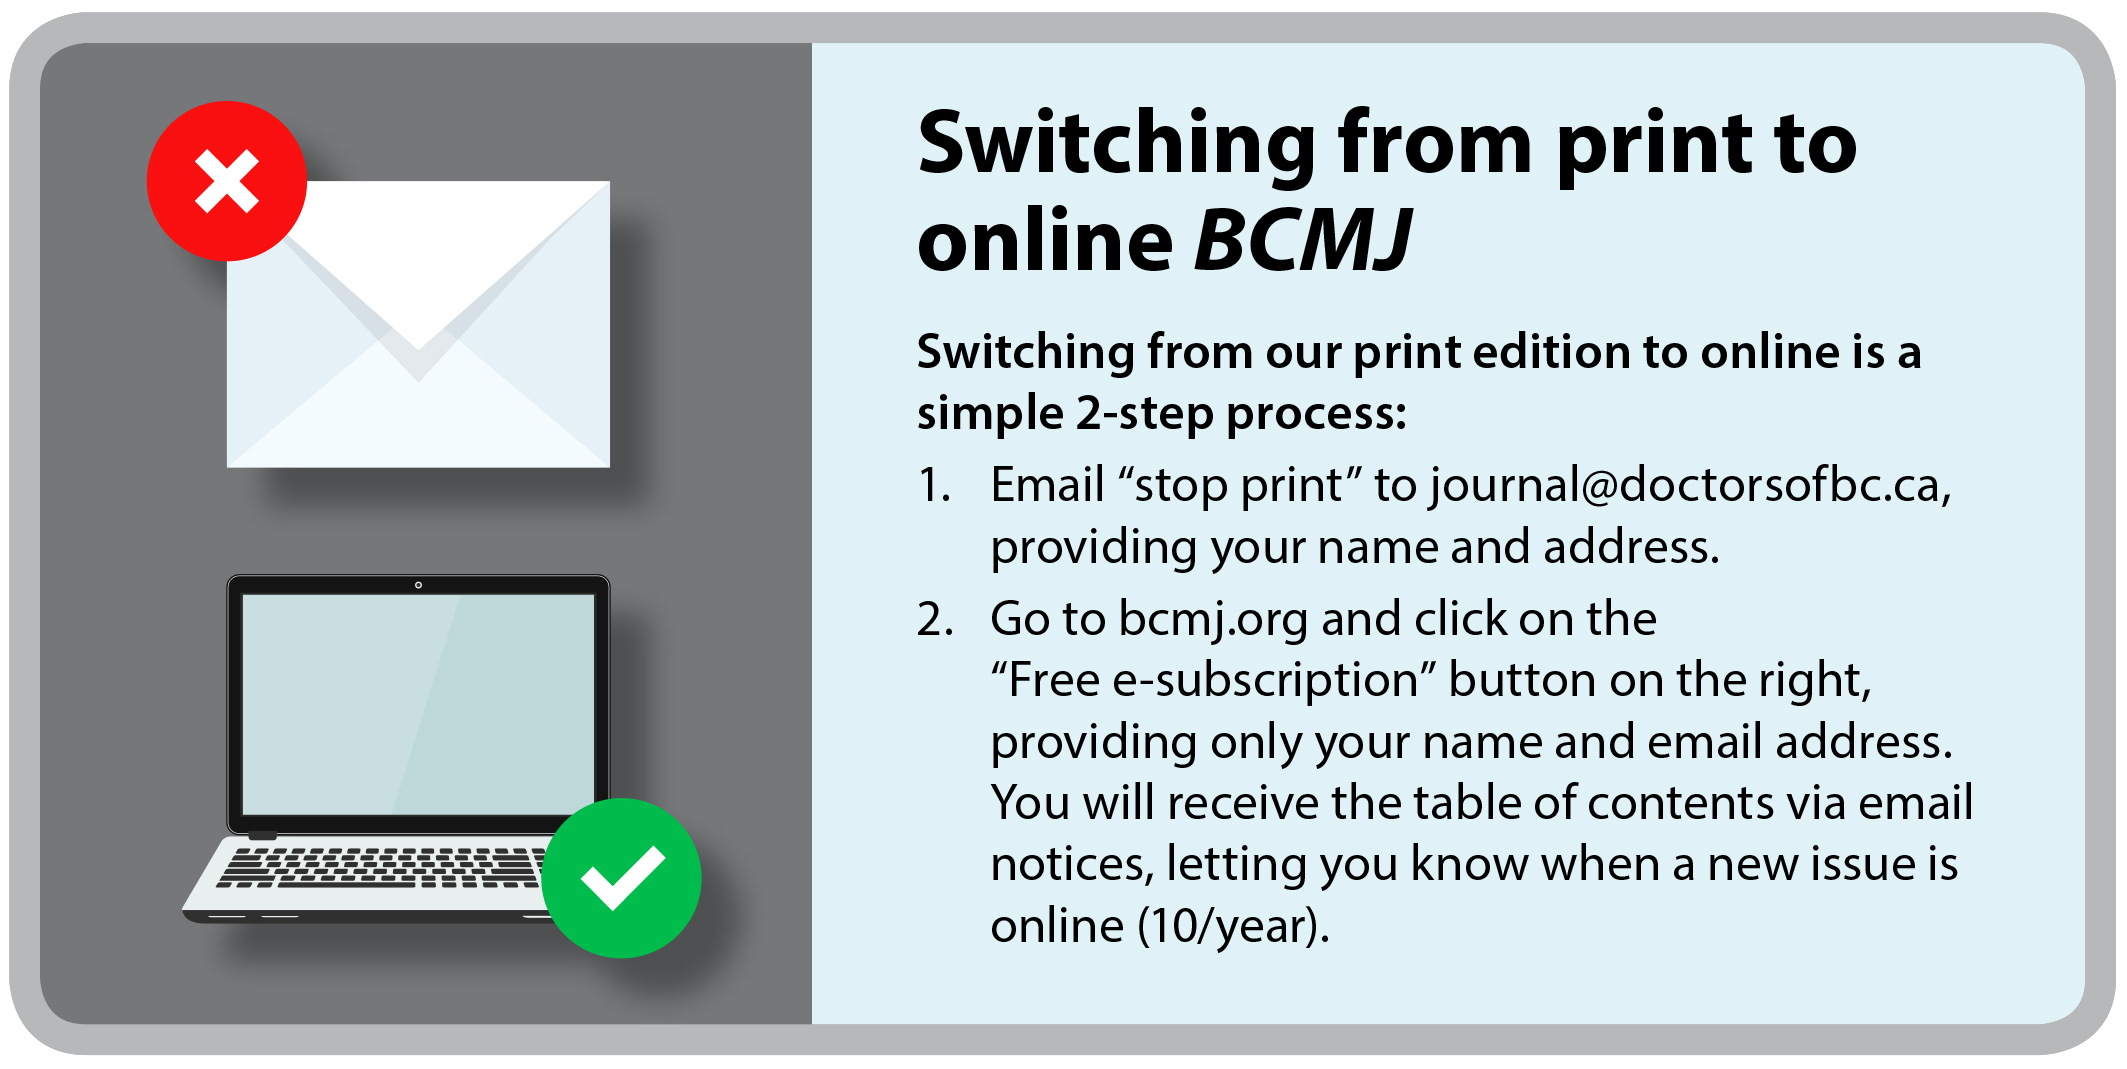 An infographic with instructions to switch to e BCMJ e-subscription